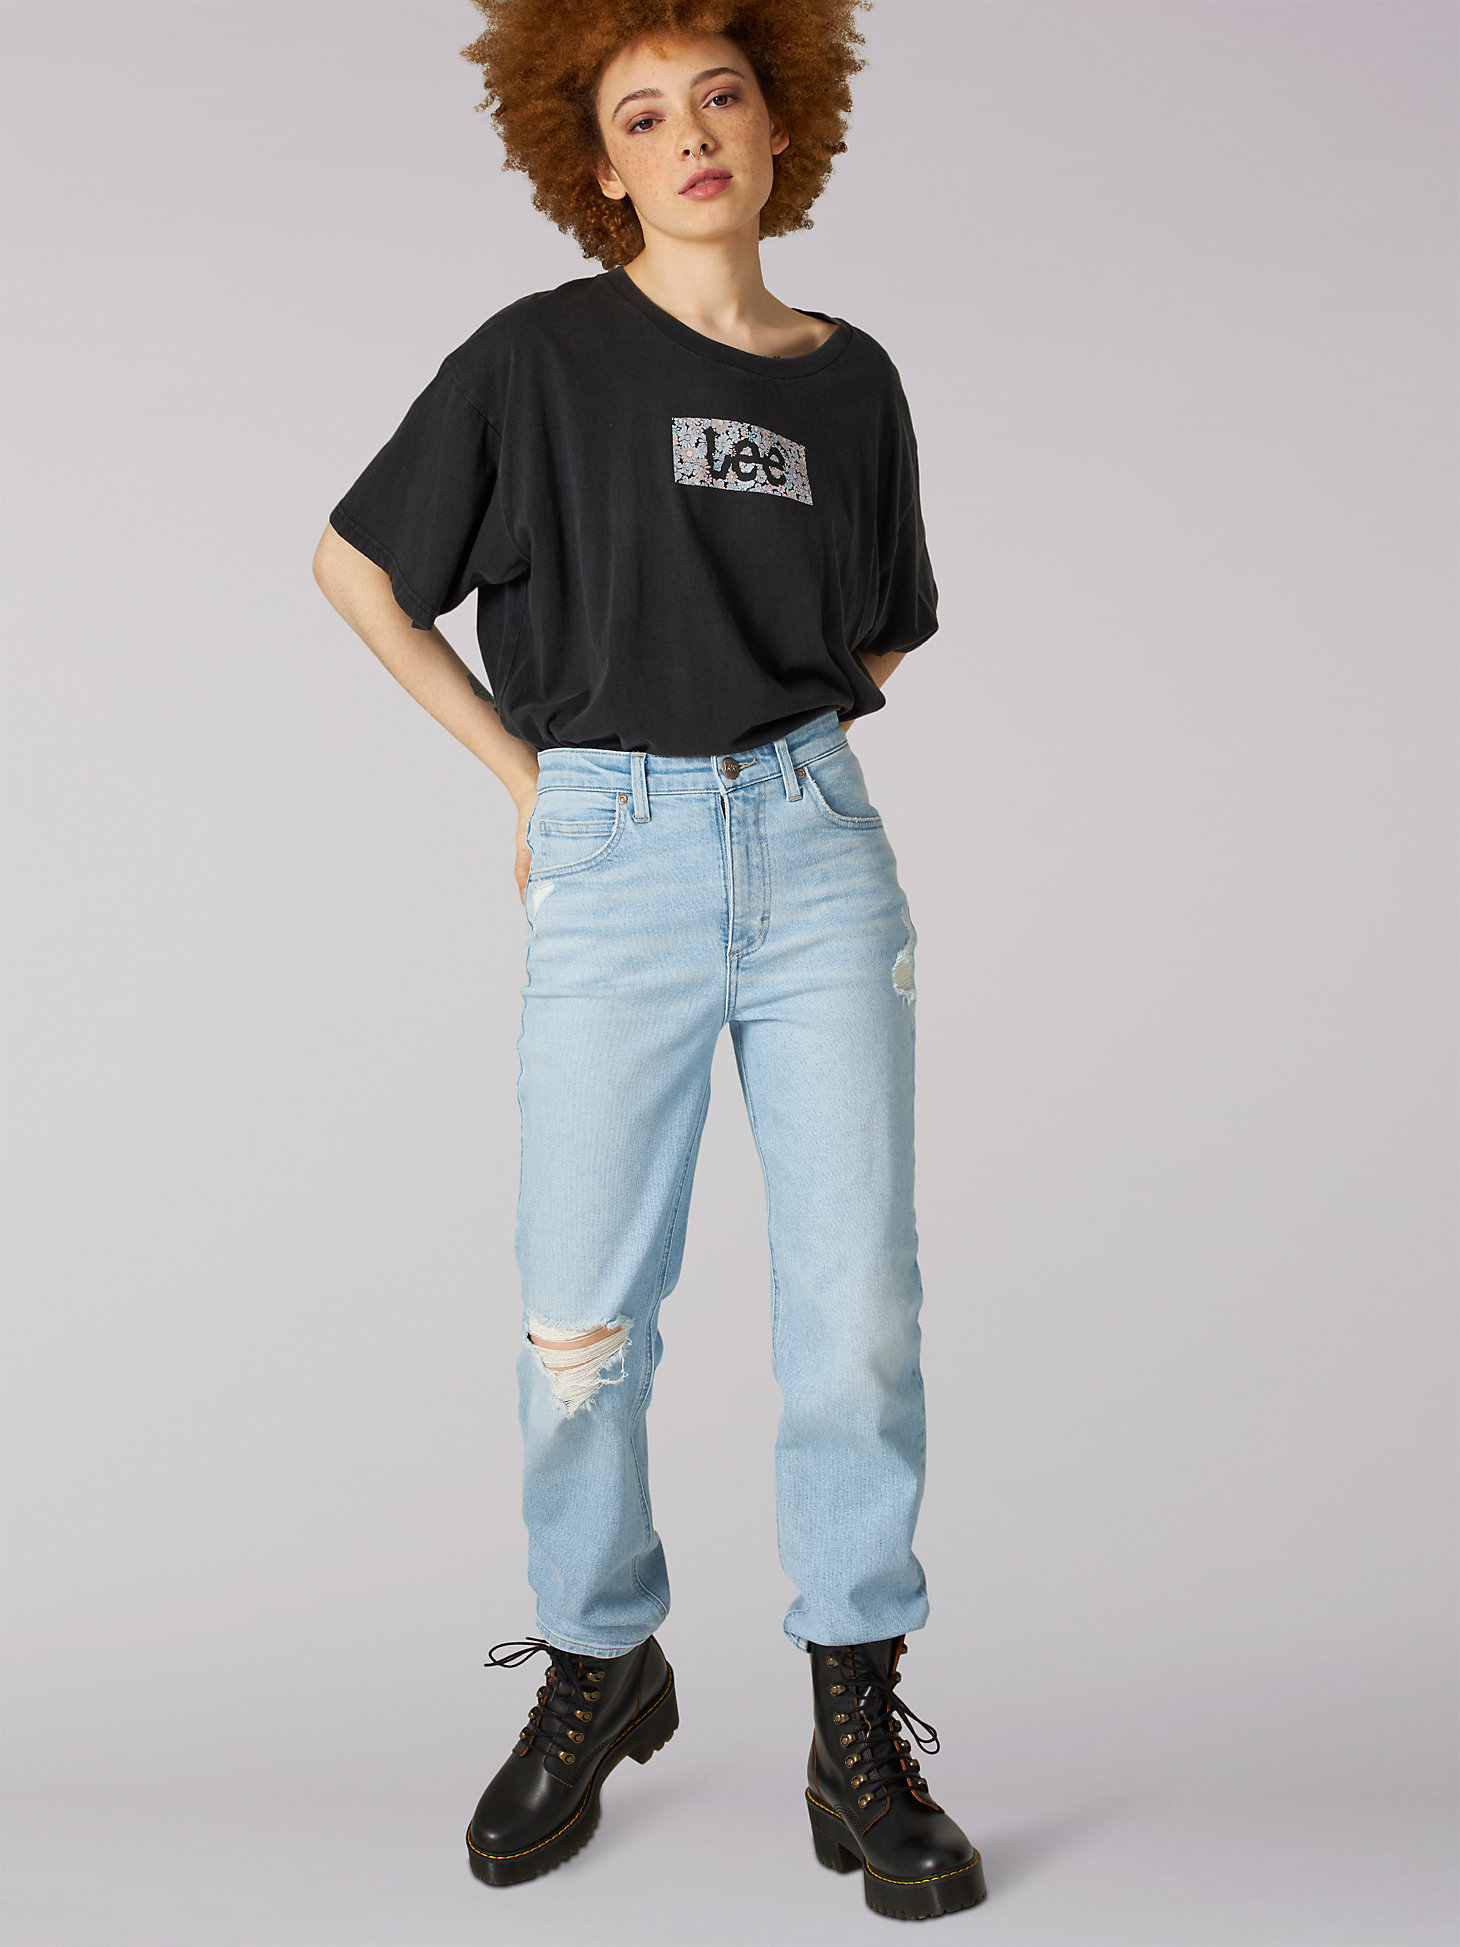 Women's Heritage Lee Oversized Graphic Tee in Washed Black alternative view 3